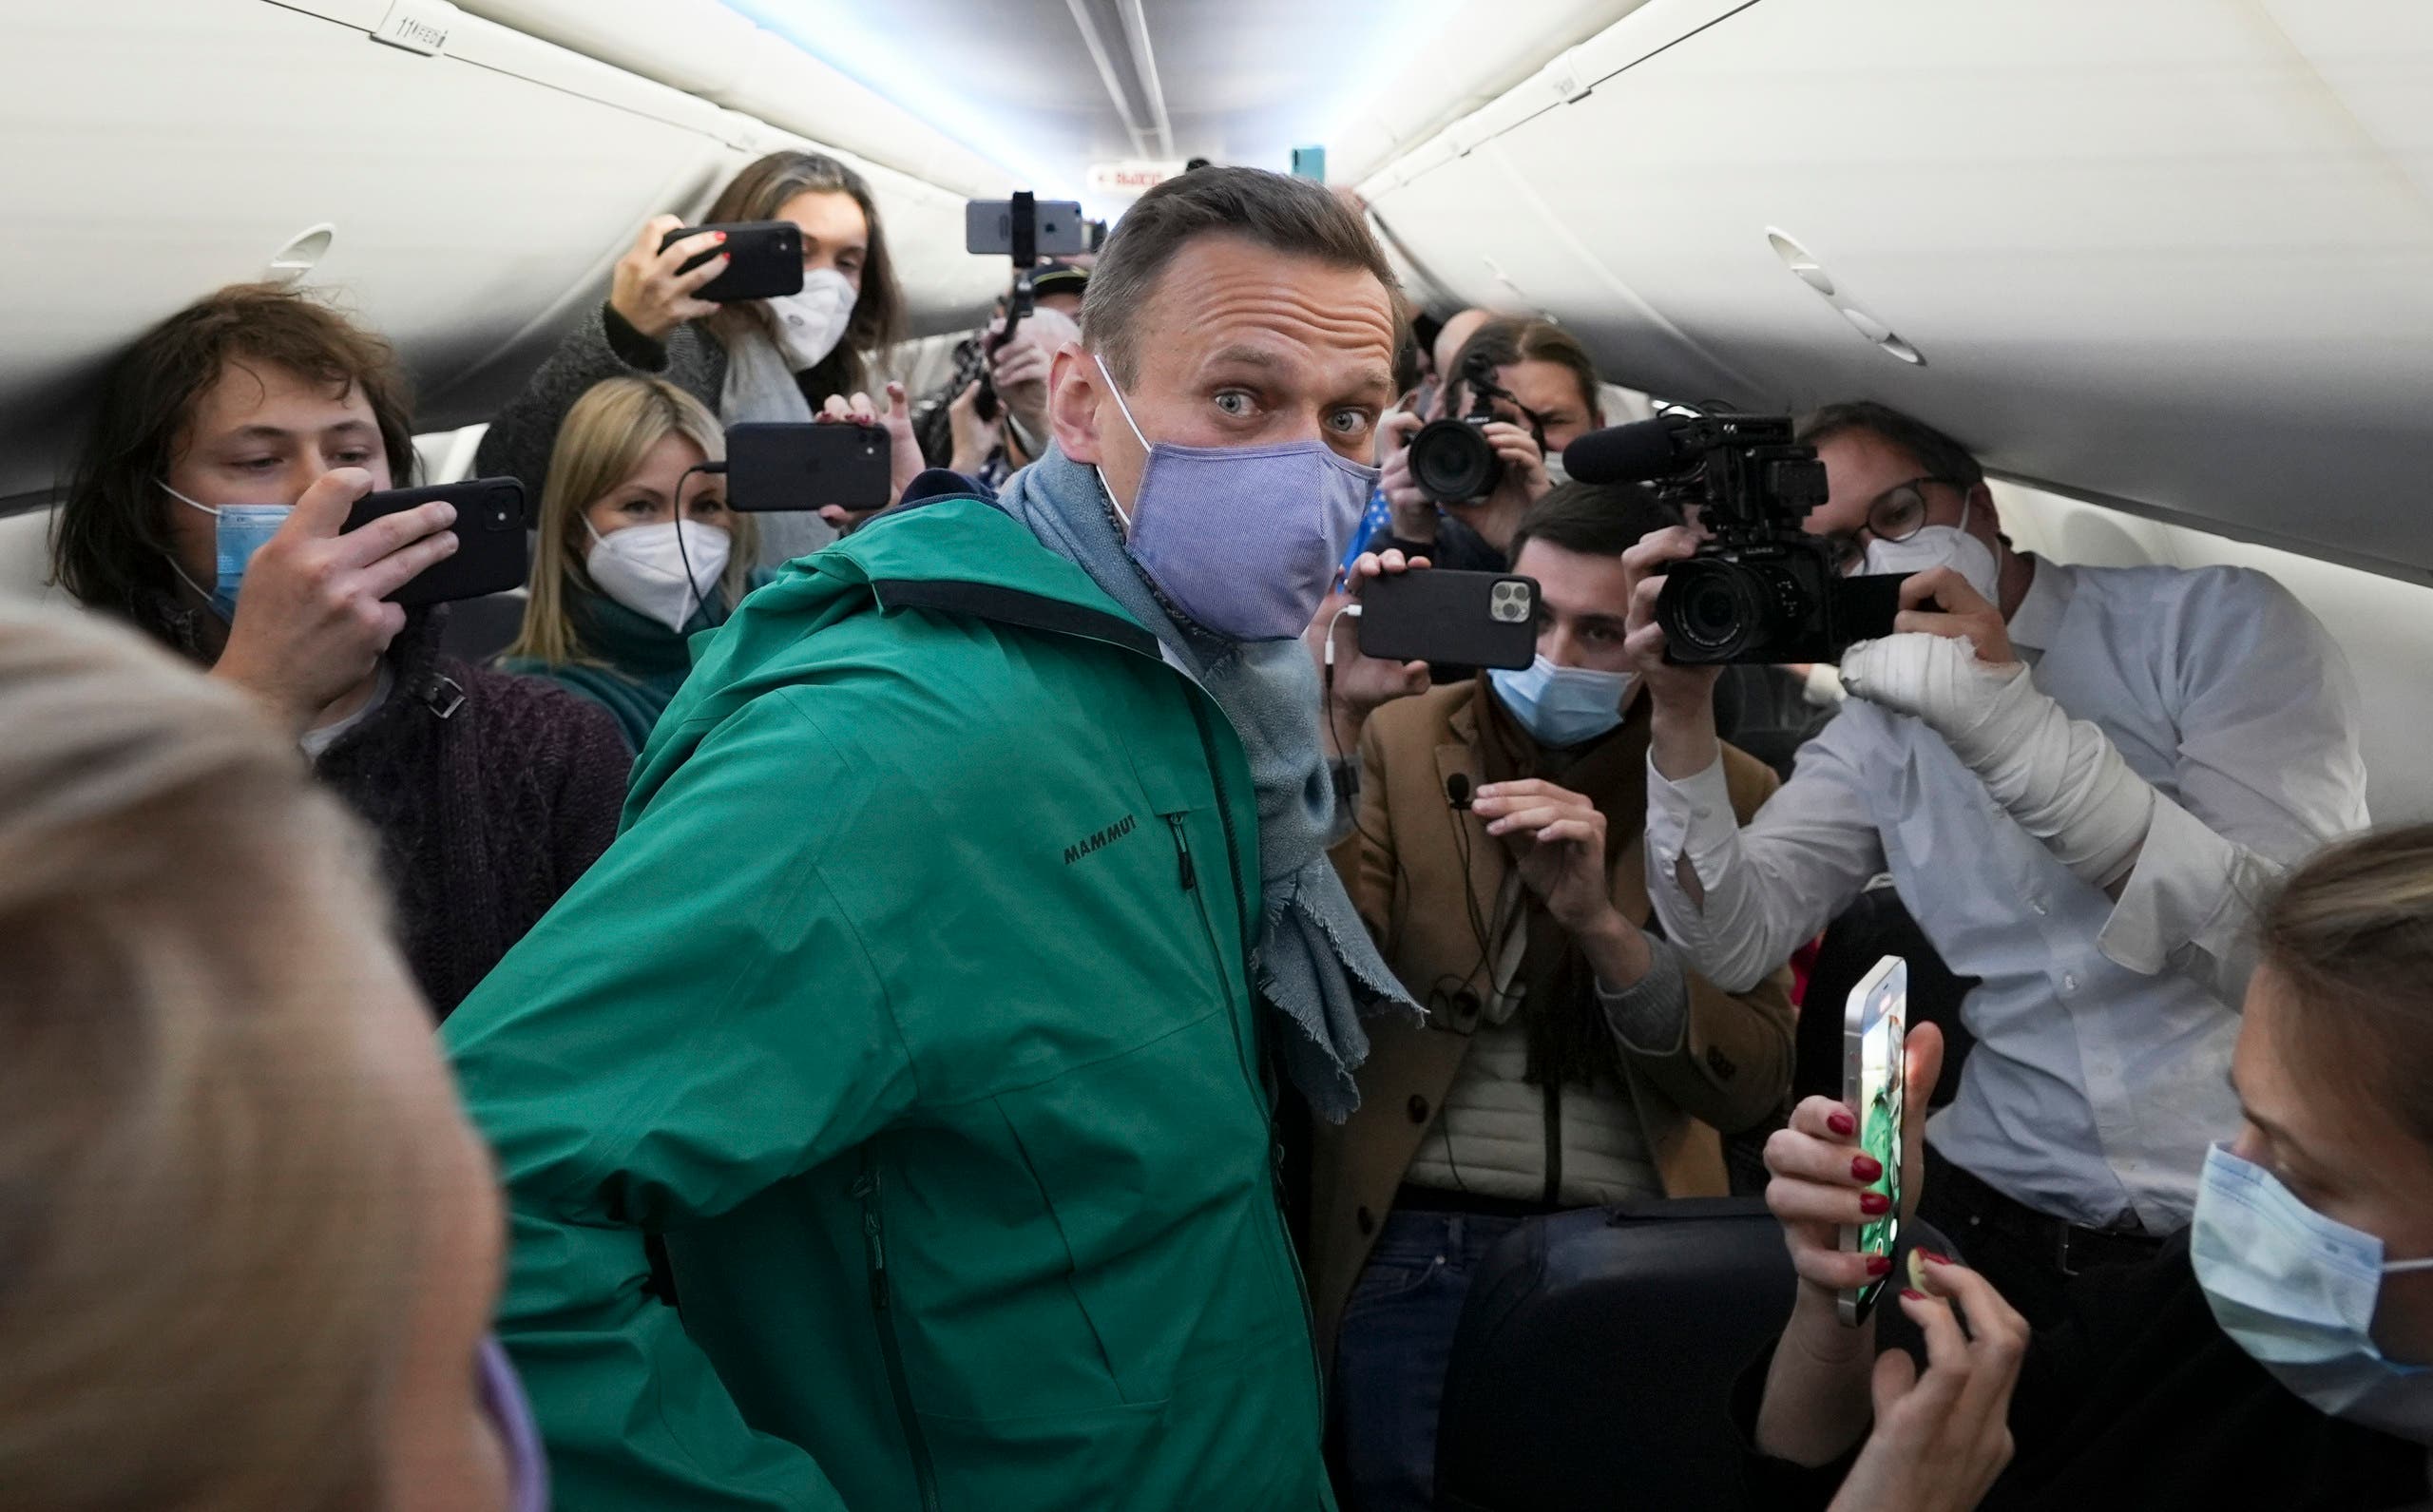 A file photo shows Kremlin critic Alexei Navalny inside the plane during his flight to Moscow from Germany on Jan. 17, 2021, before he was detained. (AP/Mstyslav Chernov)